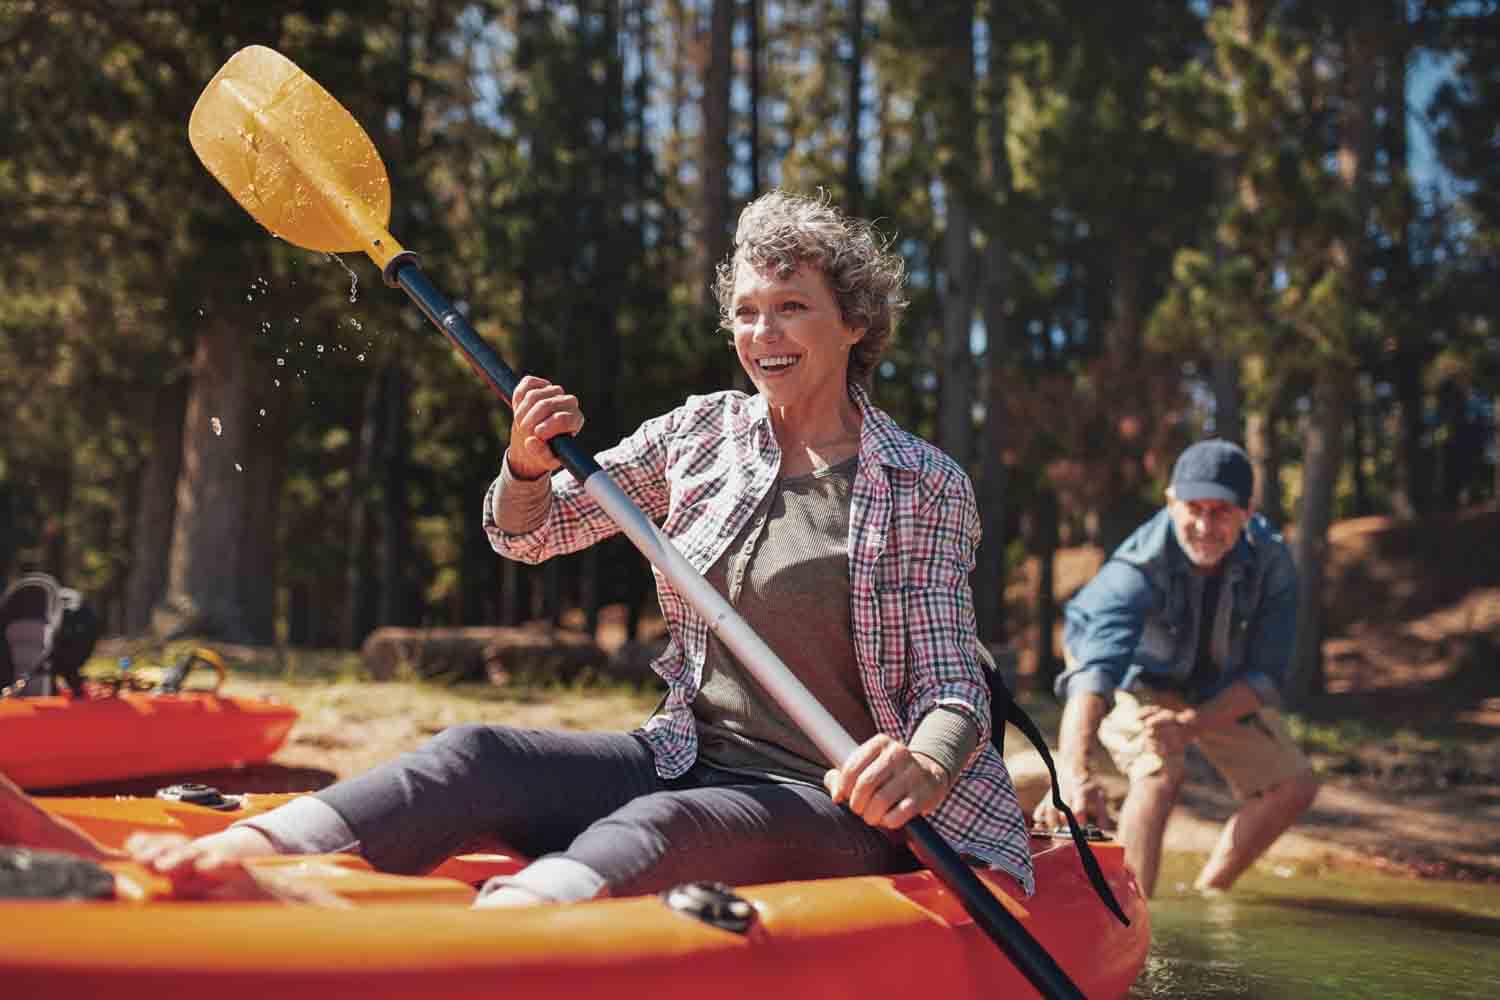 Lady smiling and holding a paddle on a canoe under the sun.